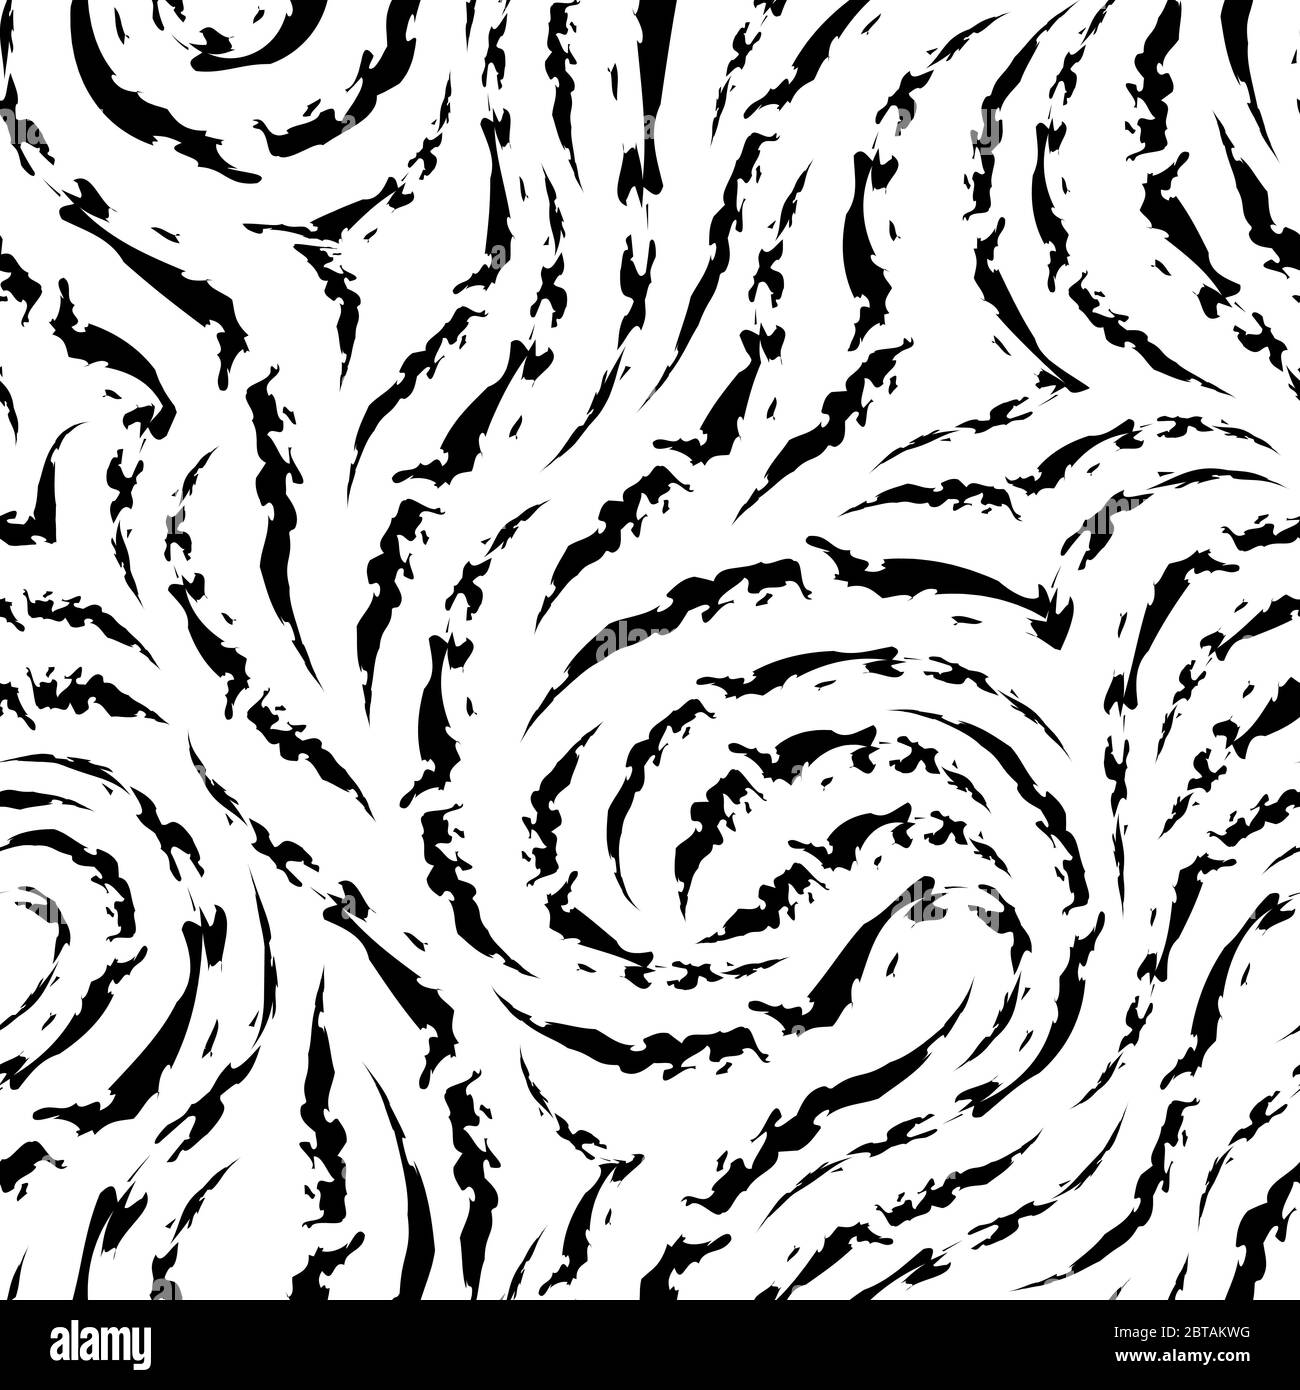 Black abstract vector torn lines seamless pattern isolated on white background. Fiber texture. Blank for printing on clothes or wrapping paper Stock Vector